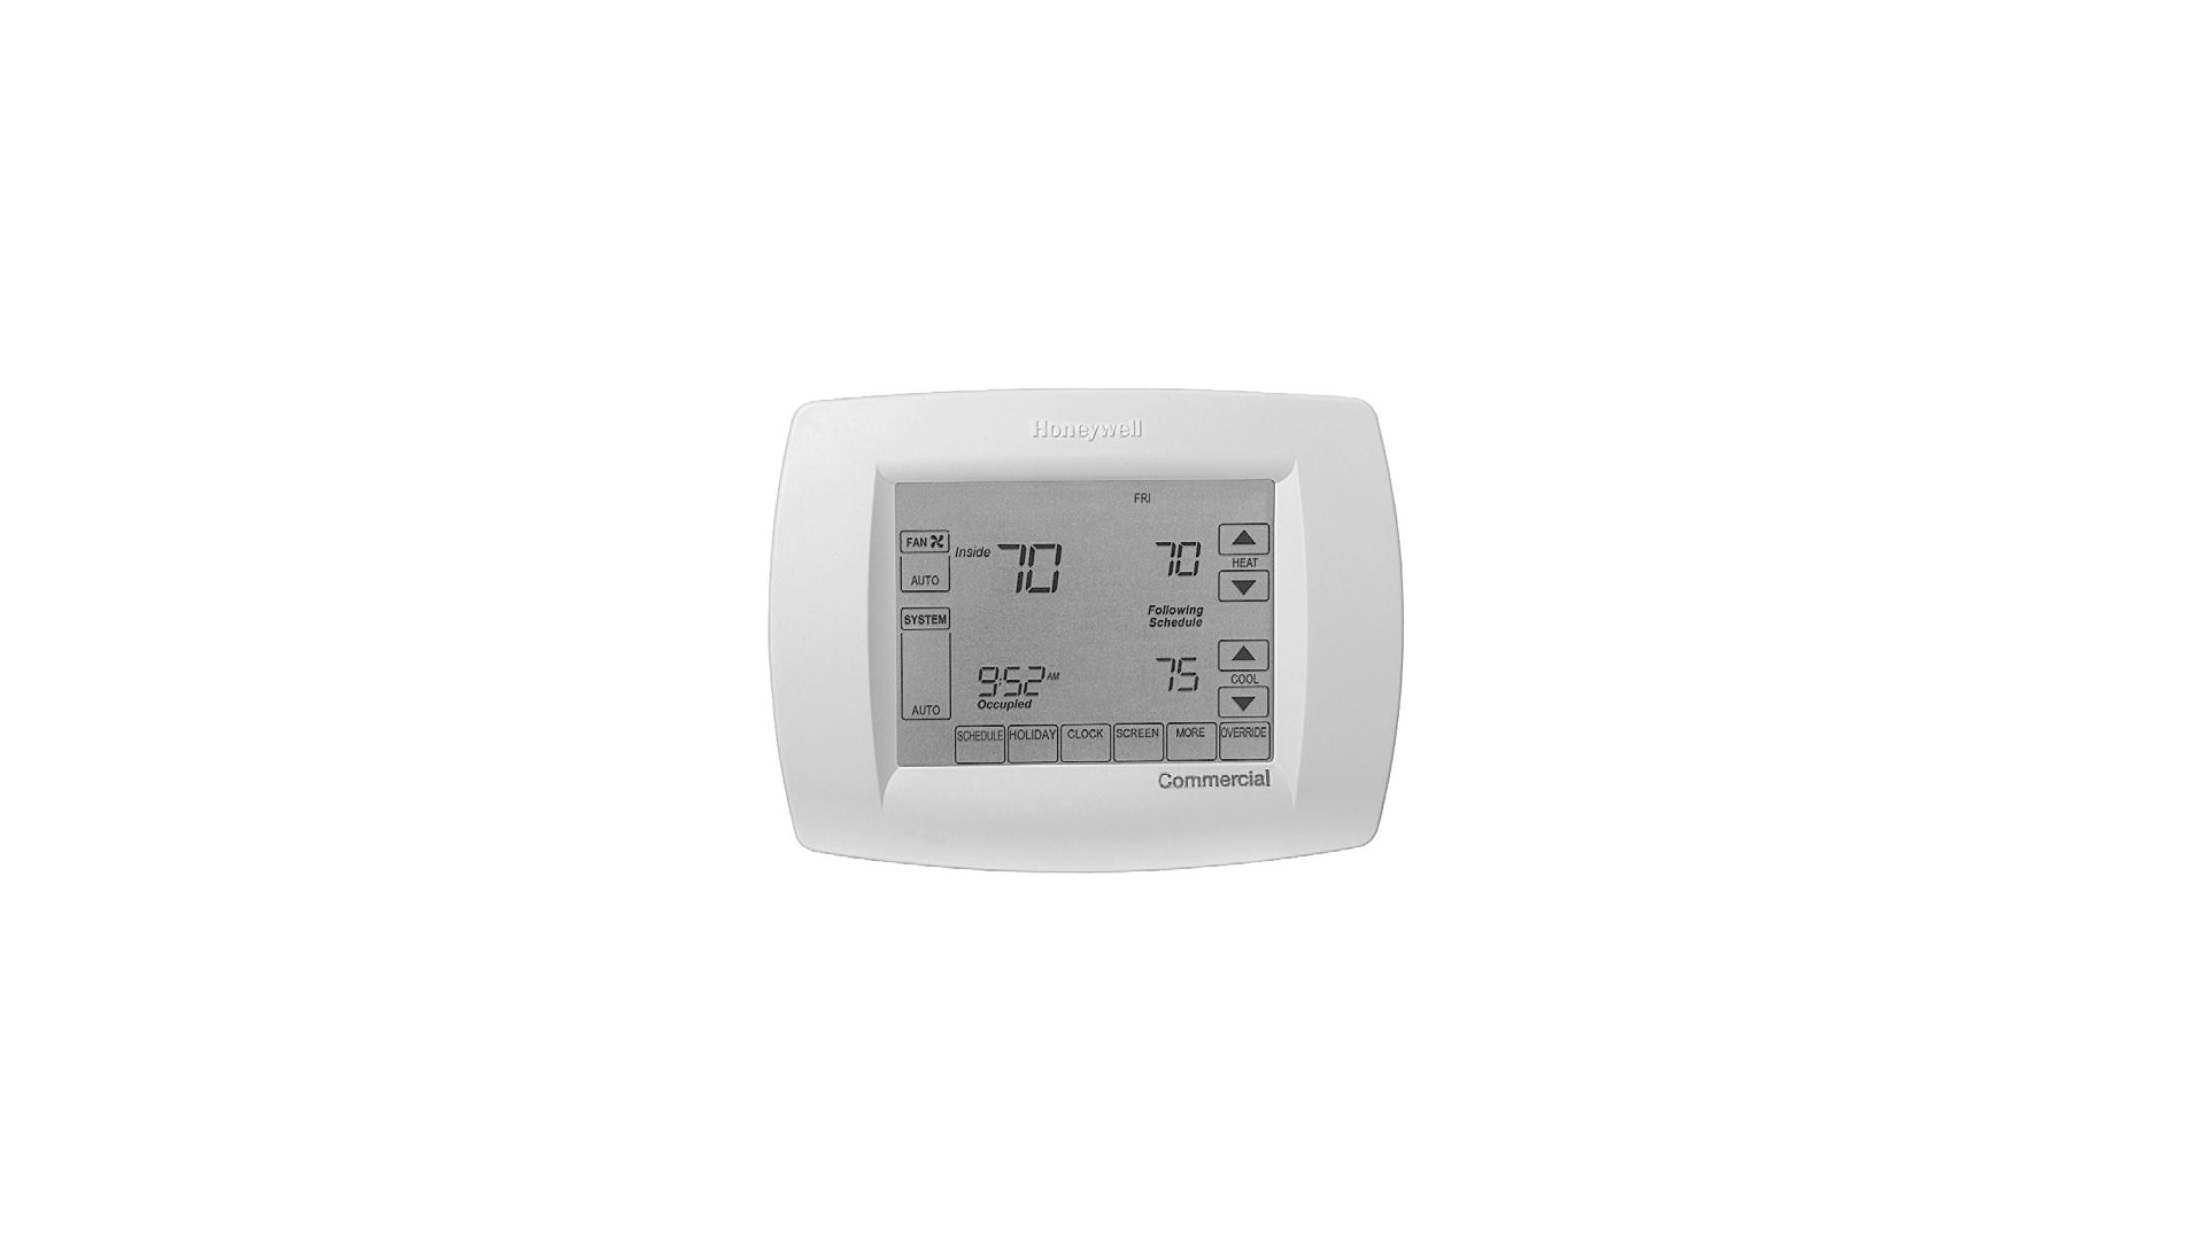 Honeywell TB8220U Commercial Programmable Thermostat OWNER’S GUIDE